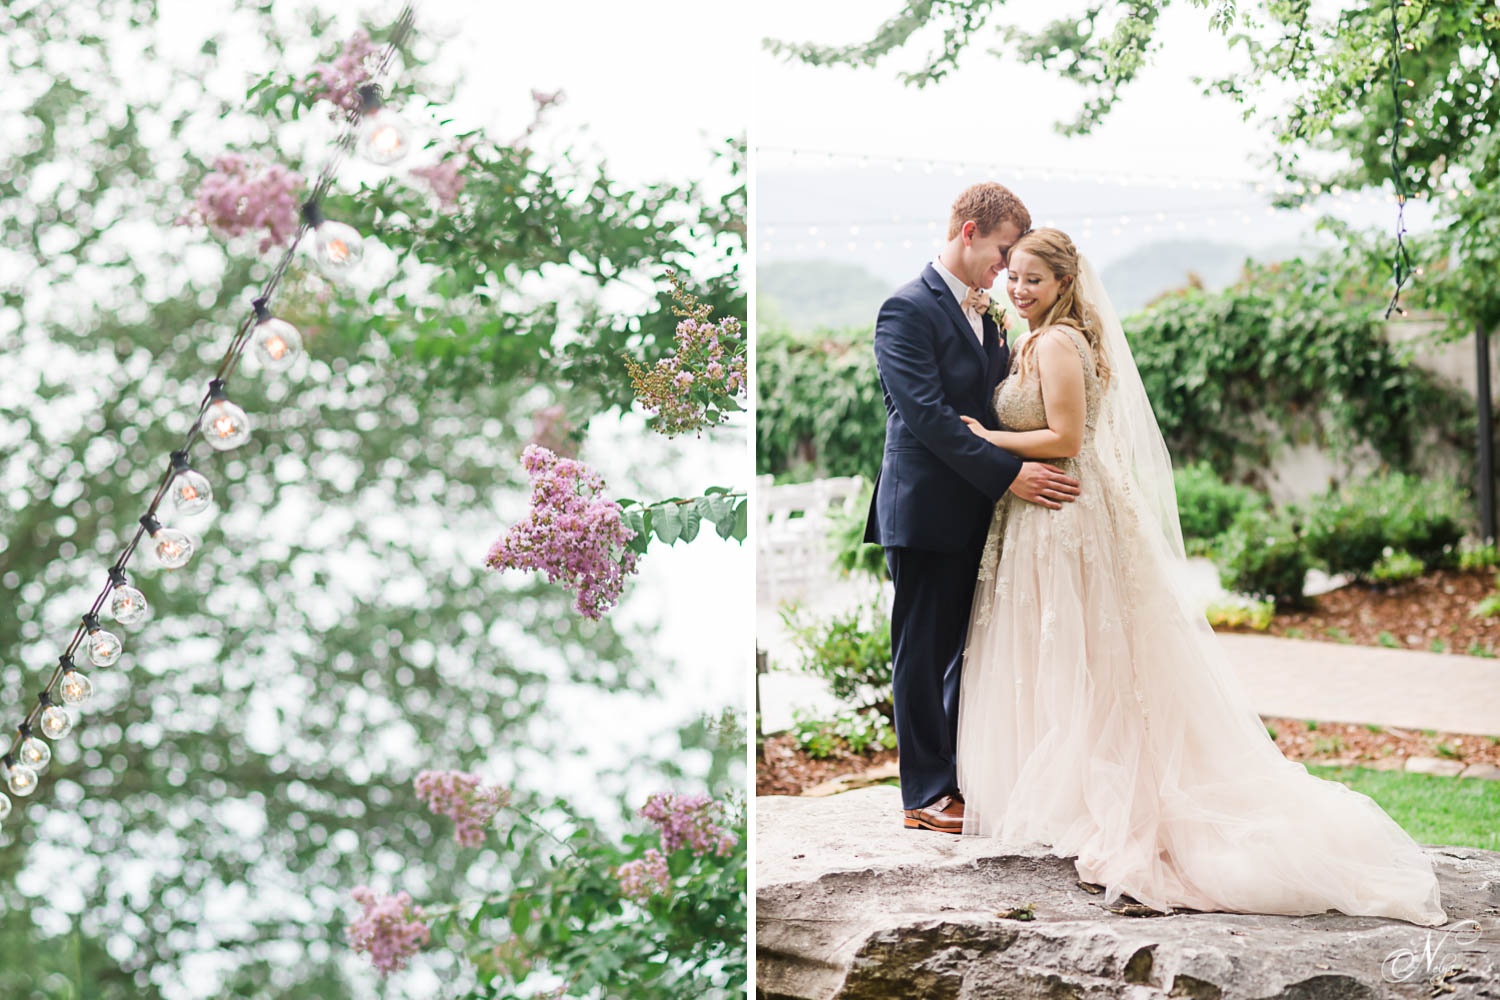 blooming pink lavender crepe myrtle. And bride and groom outside standing on limestone rocks with Chattanooga in the background